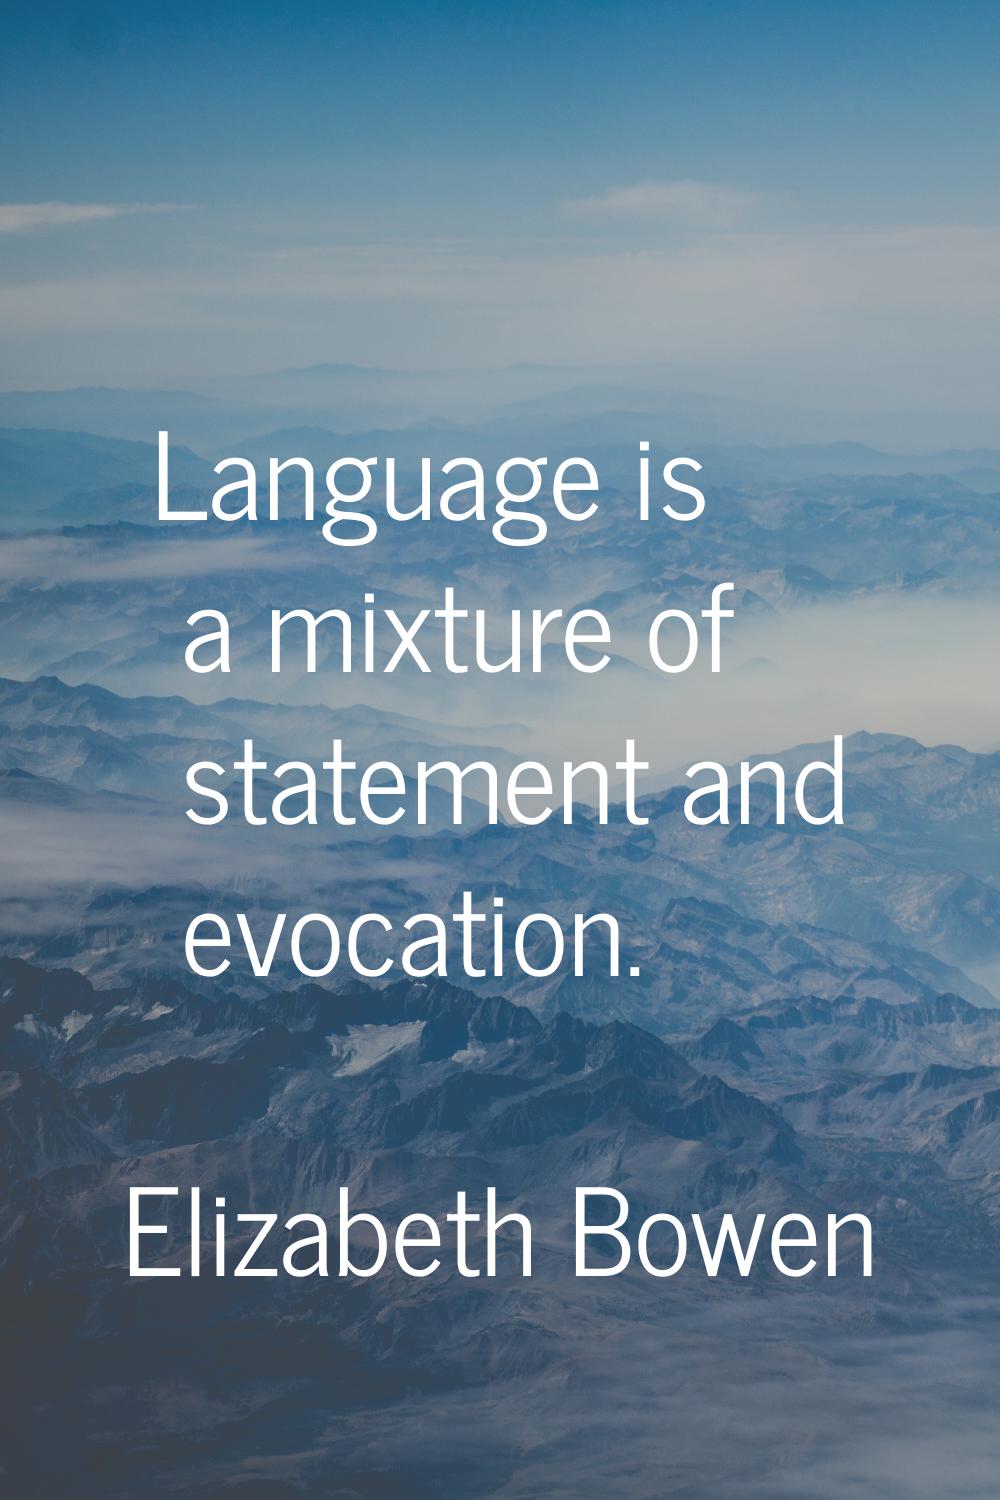 Language is a mixture of statement and evocation.